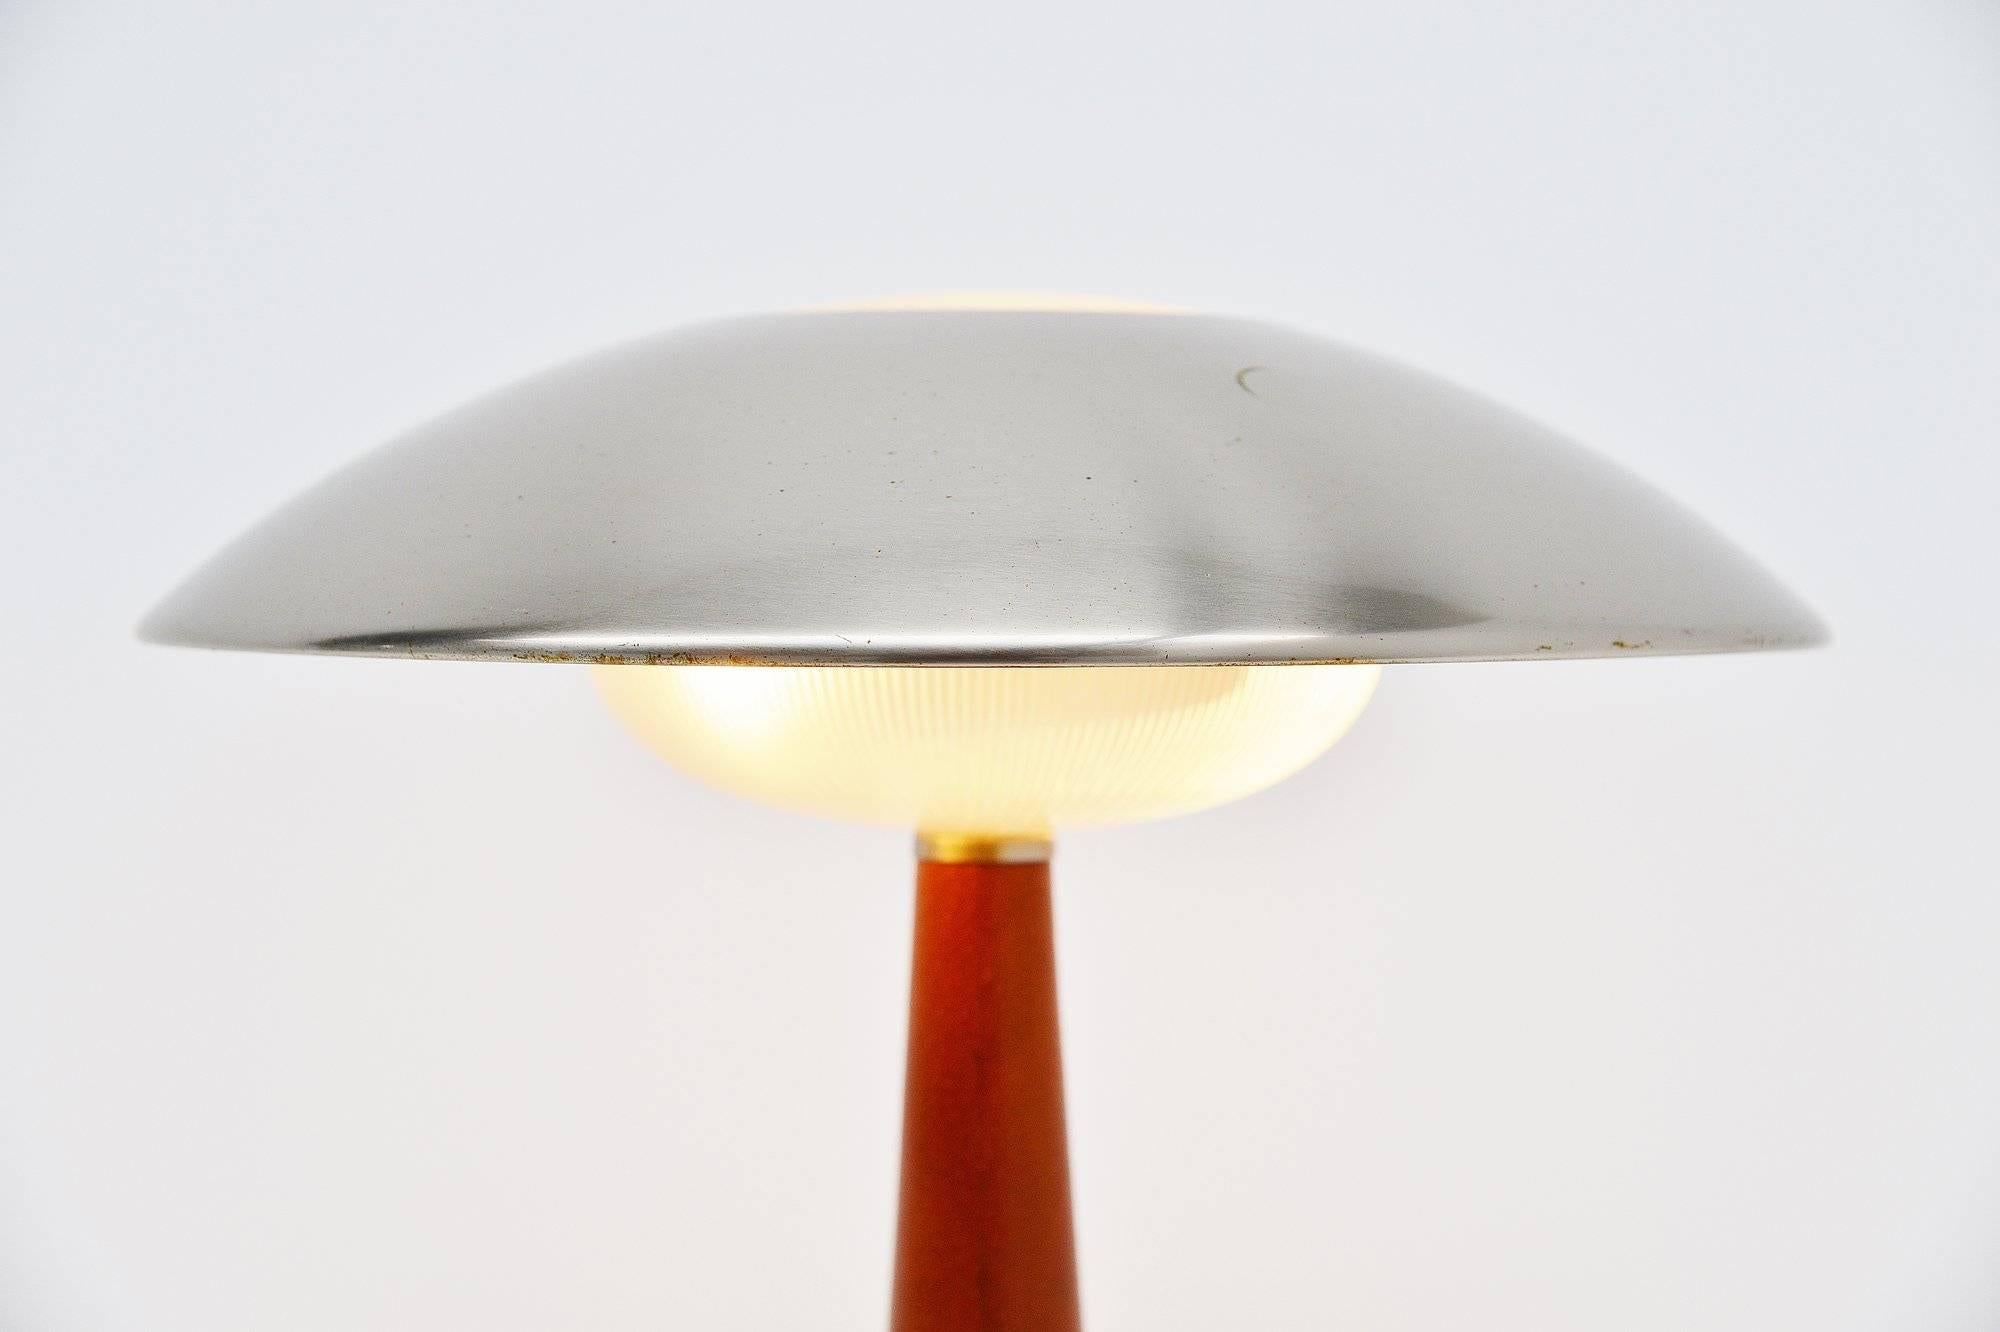 Very nice table lamp designed and made by Stilnovo, Italy, 1960. This is for a very nice modernist shaped table pendant lamp with a nickel-plated shade, glass diffuser and cognac leather covered base. This is a very nice lamp designed in the UFO